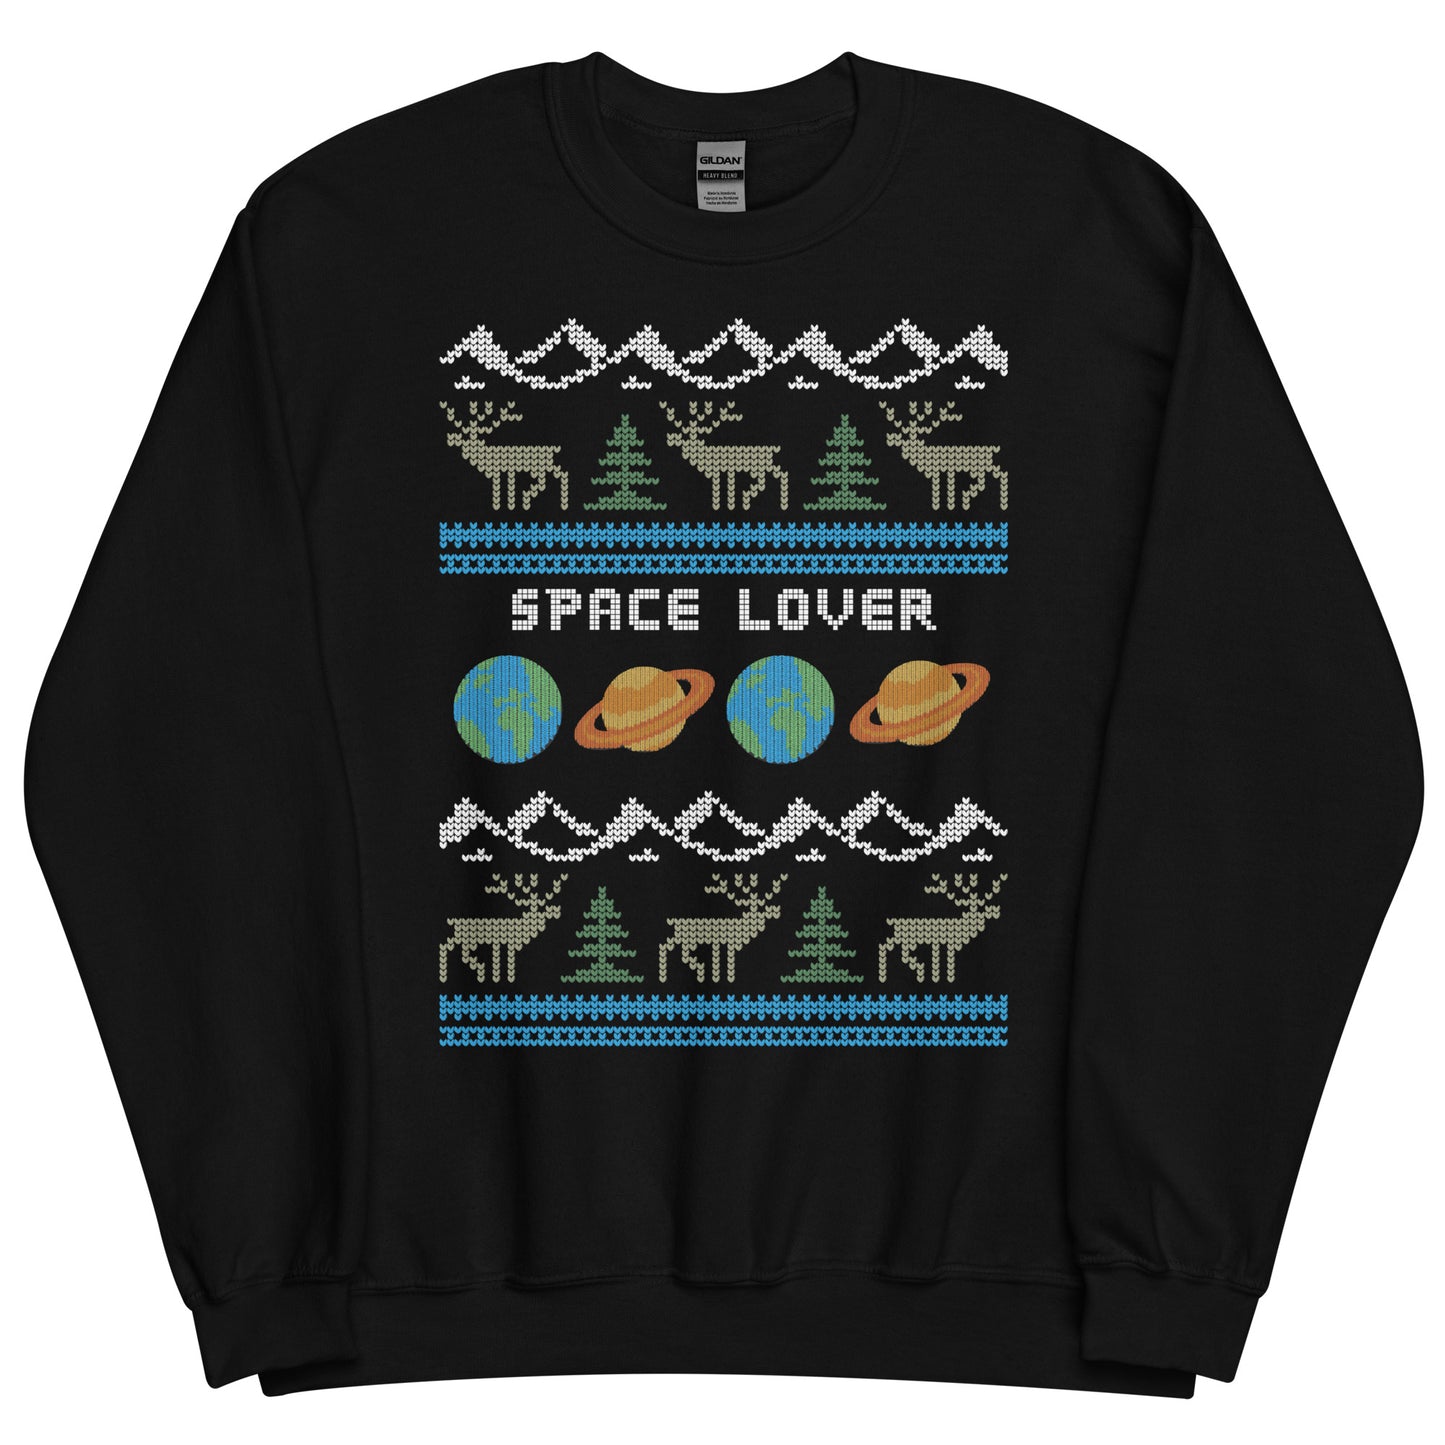 Ugly Space Lover Christmas Sweater